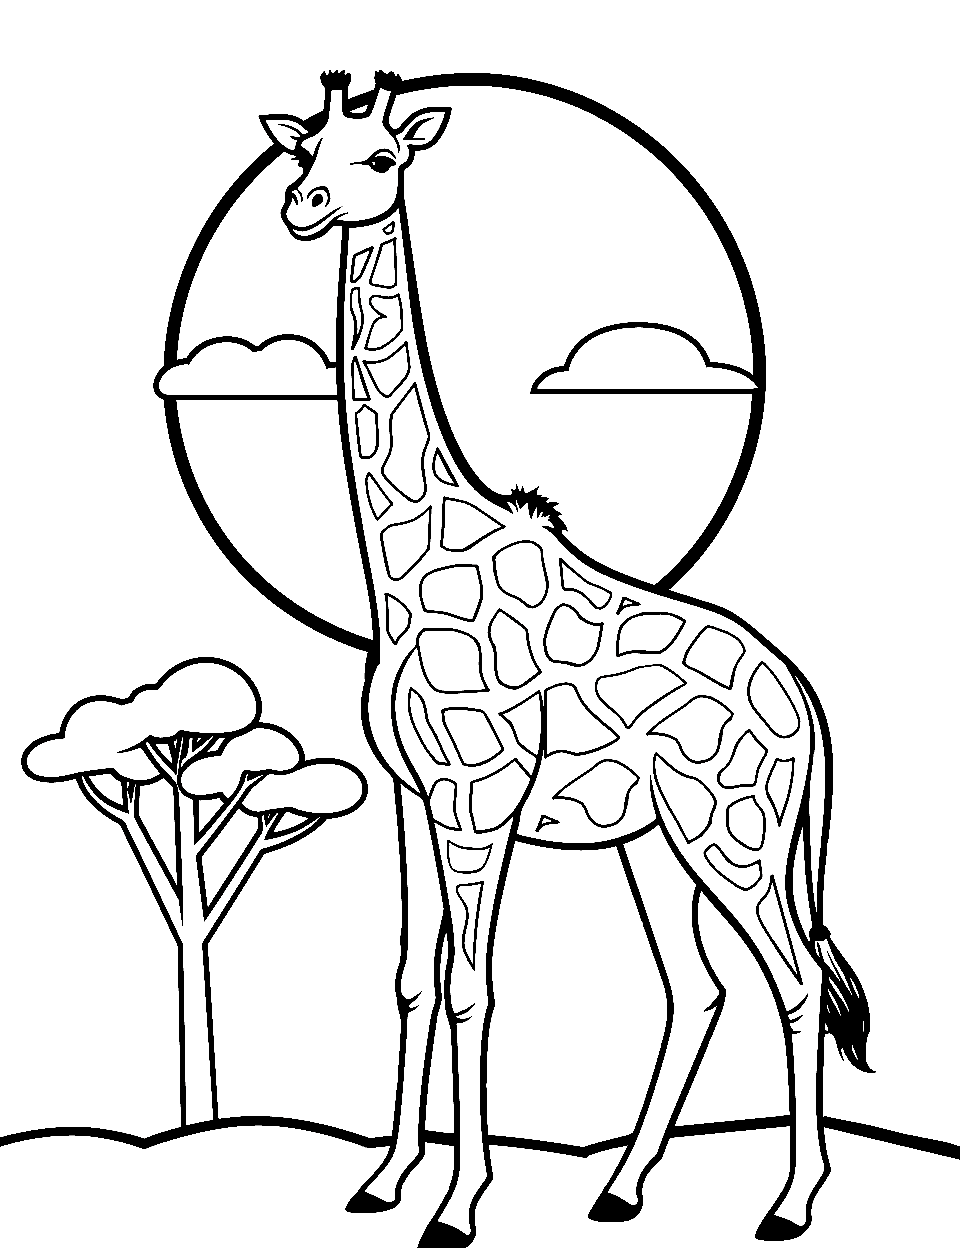 Sunset Silhouette Coloring Page - The silhouette of a giraffe against a beautiful African sunset.